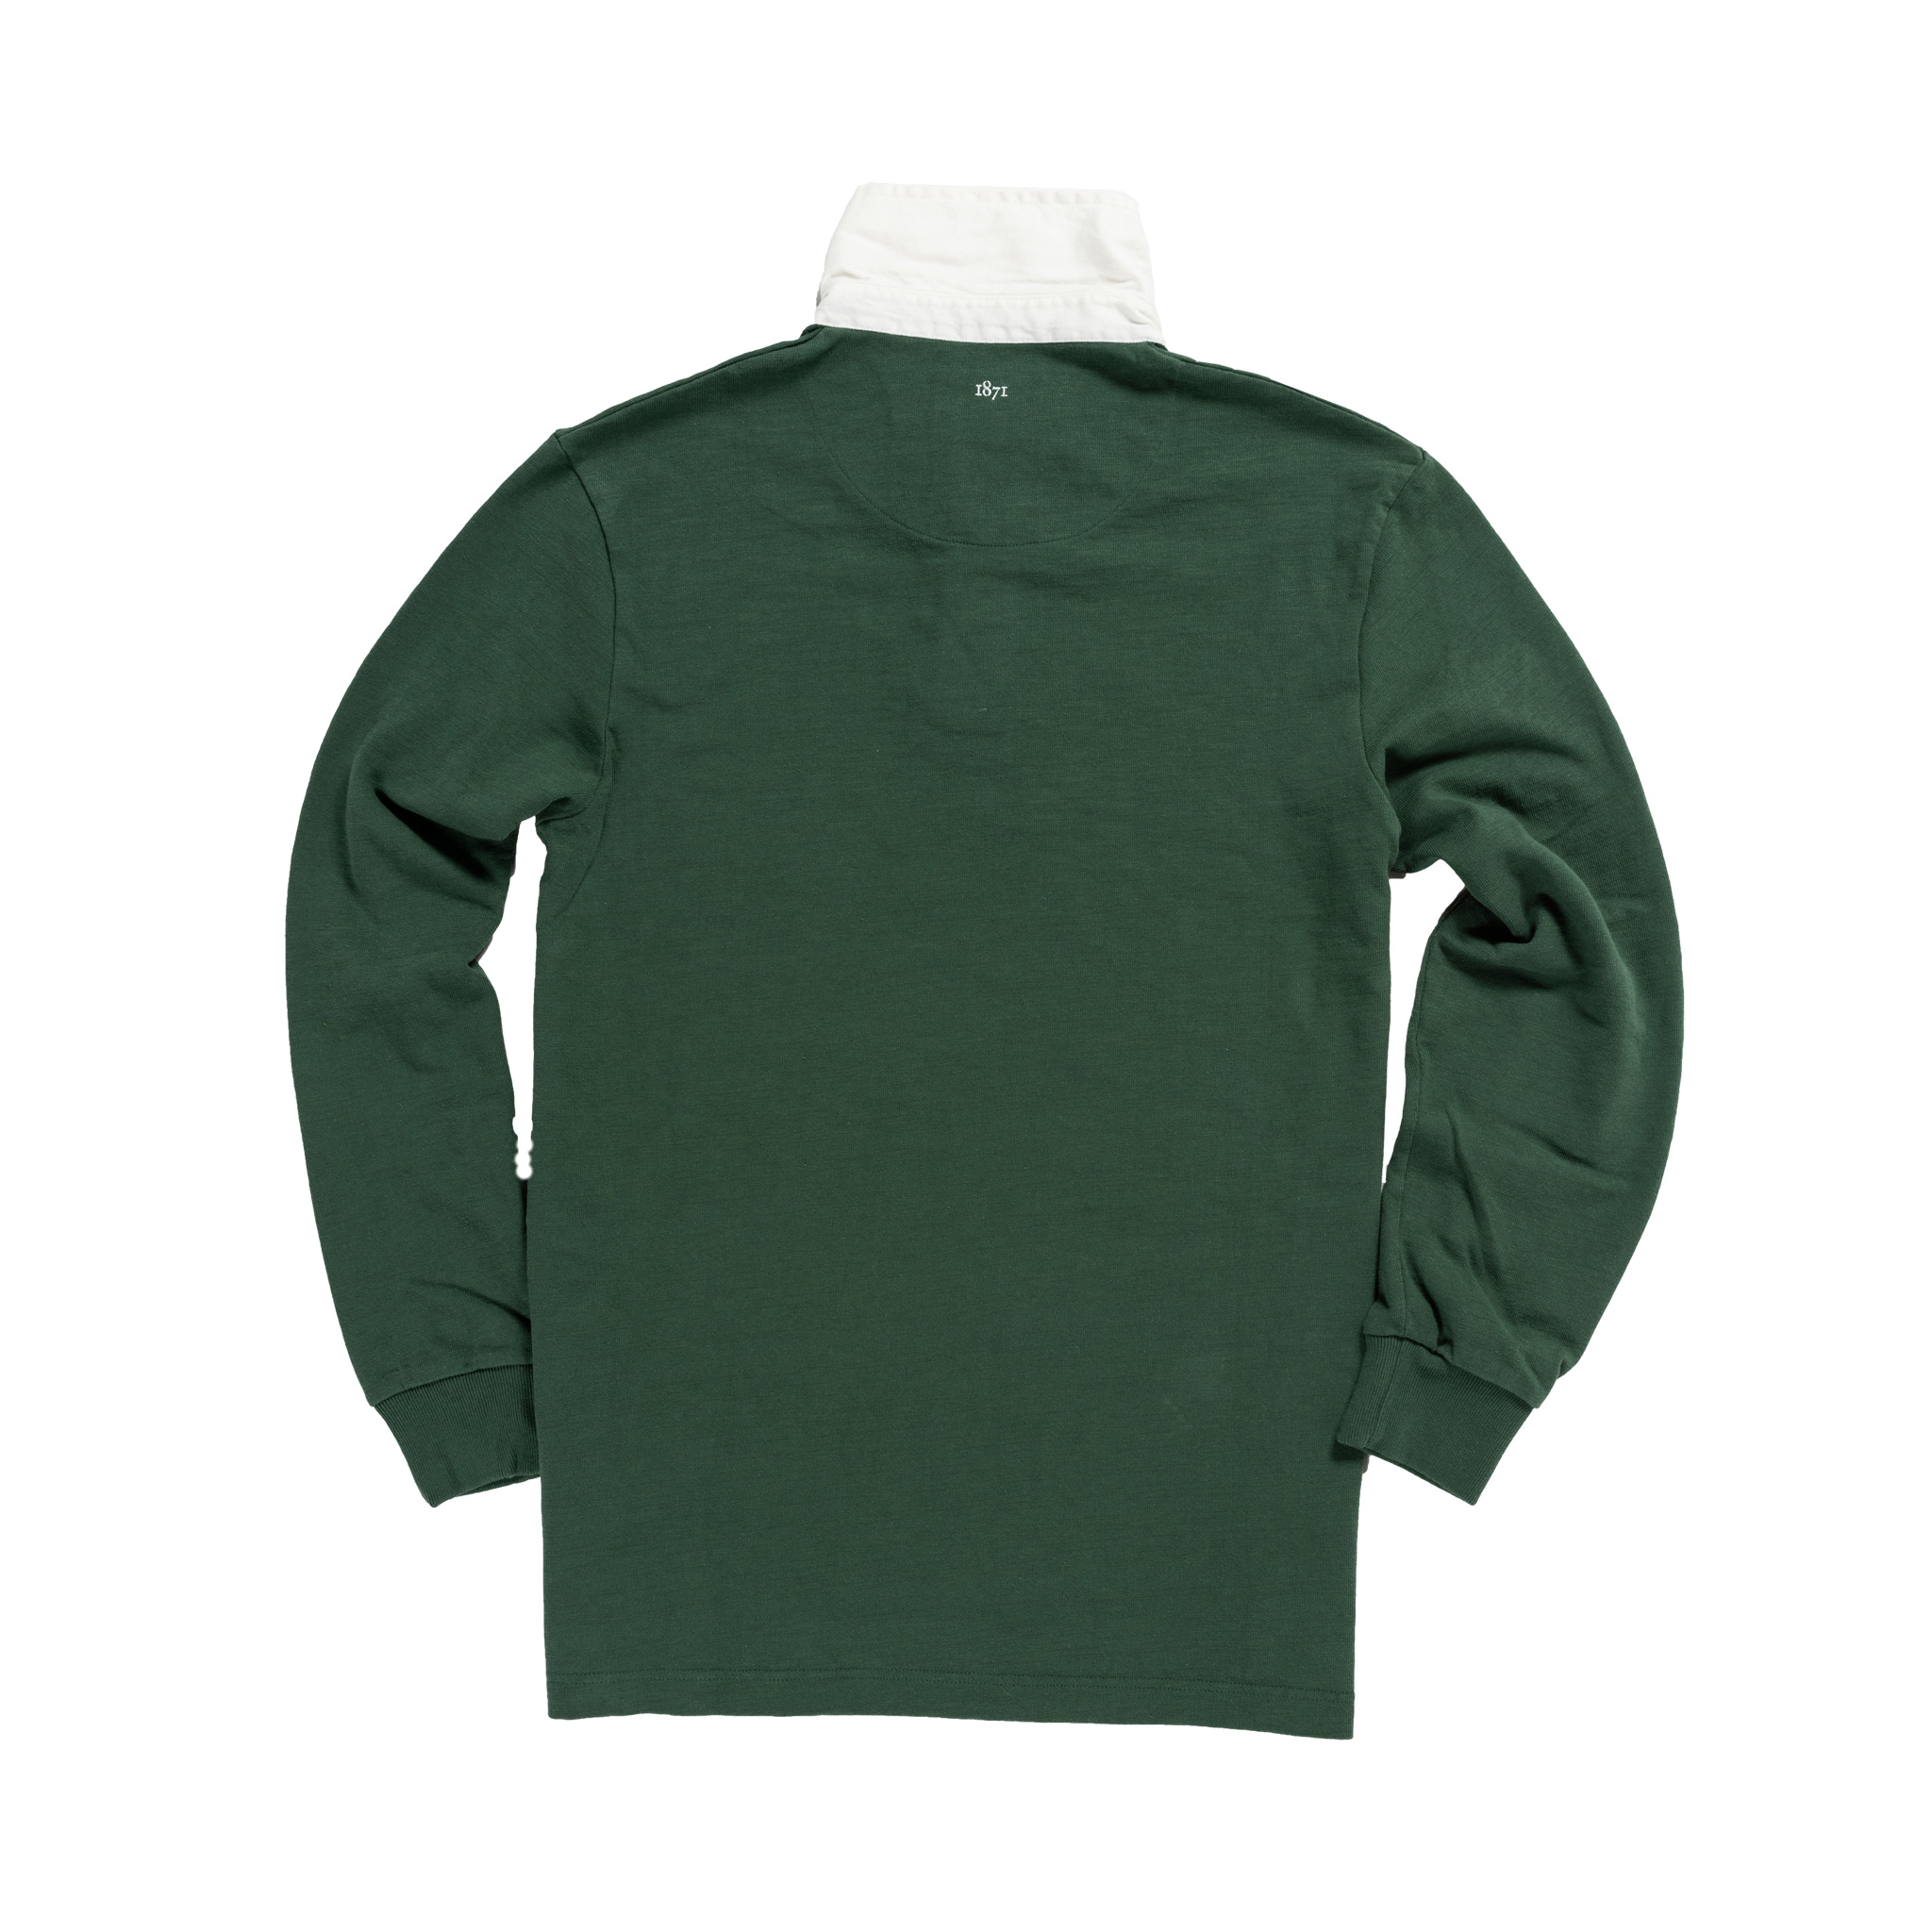 Dartmouth Rugby Shirt_Back